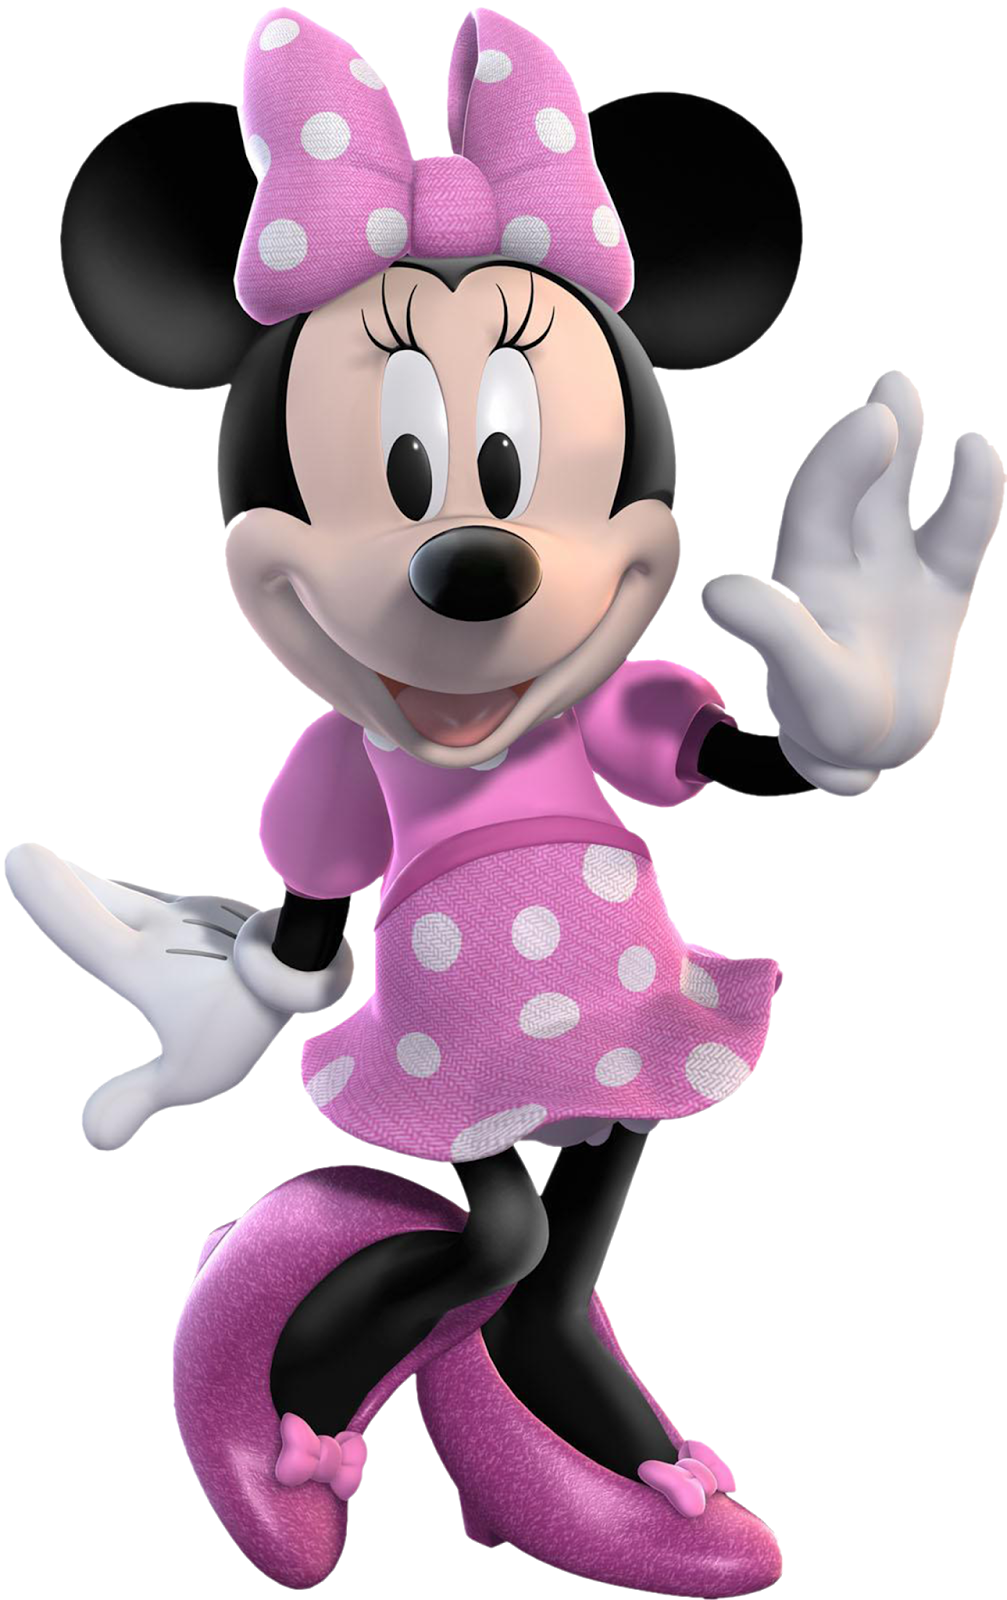 Baby Minnie Mouse Background PNG Image